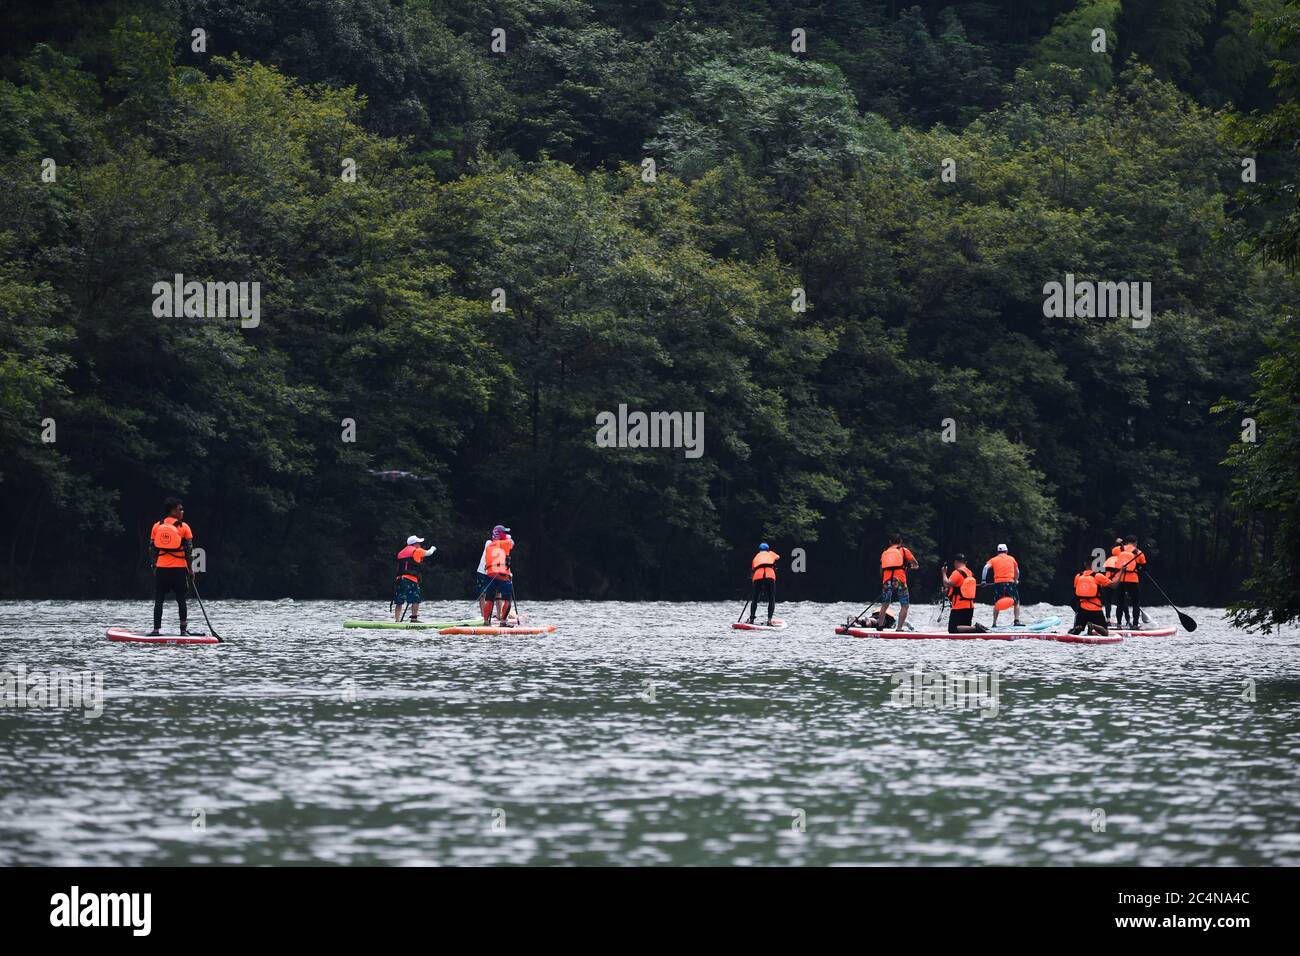 Hangzhou, China's Zhejiang Province. 28th June, 2020. Water sports enthusiasts participate in a paddleboarding activity on the Huyuan River in Huyuan Township of Fuyang District, Hangzhou, east China's Zhejiang Province, June 28, 2020. Township-level governments in Fuyang District have worked in collaboration to maximize the Huyuan River's ecological resources and promote local ecotourism. Credit: Xu Yu/Xinhua/Alamy Live News Stock Photo